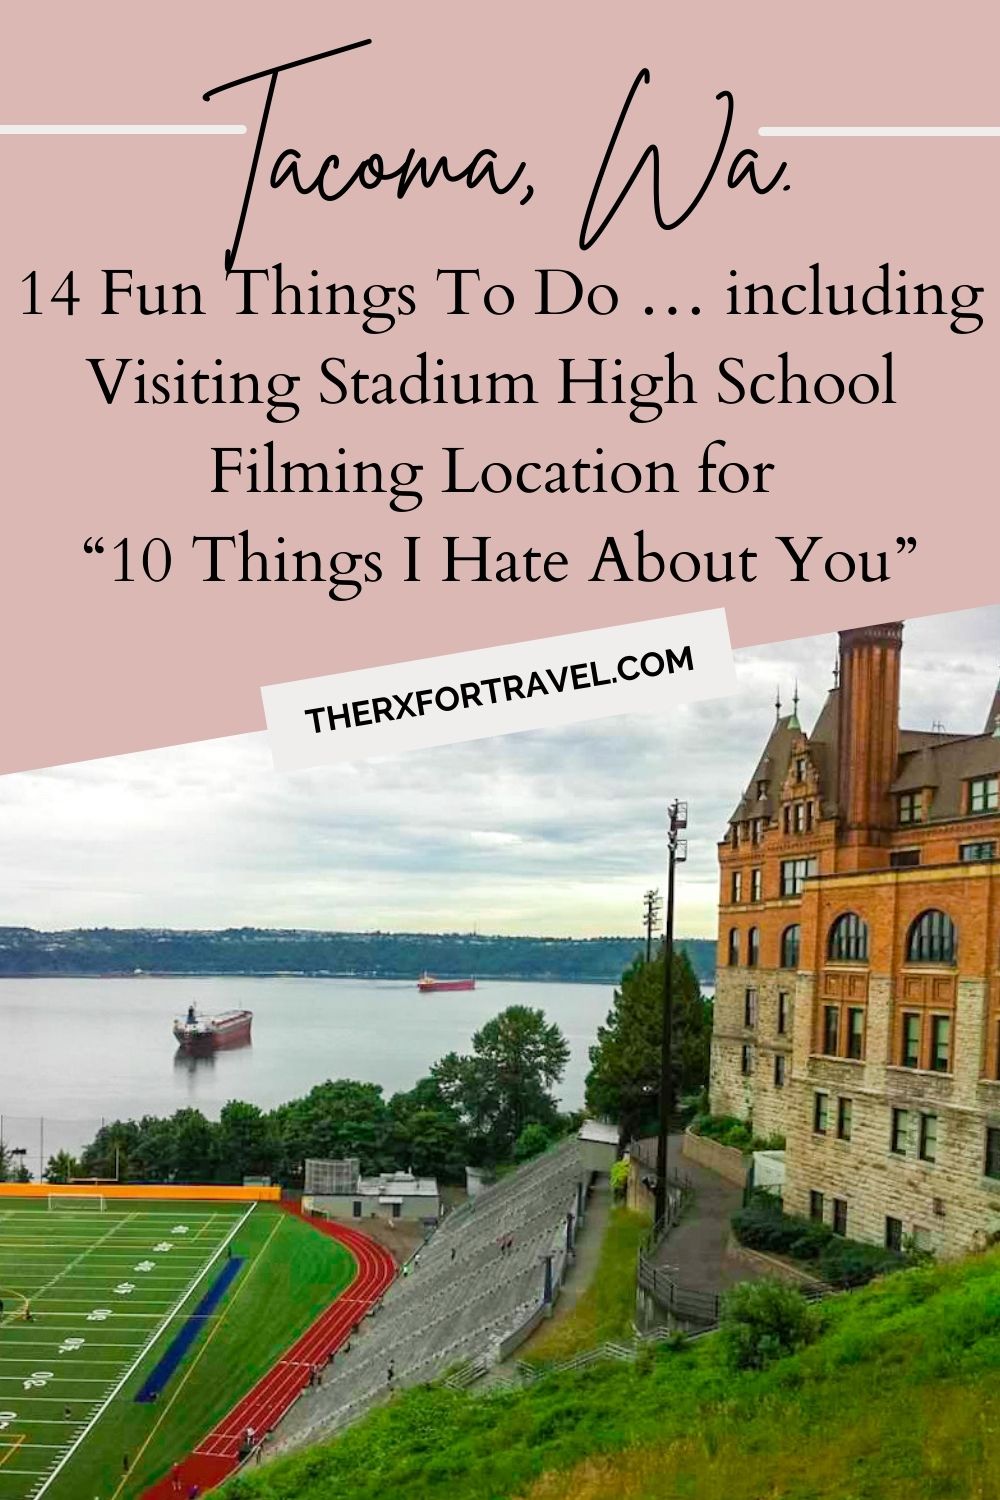 Read on to find out more about some free, some educational, and all the fun things to do in Tacoma, Washington including visiting the filming location for "10 Things I Hate About You"